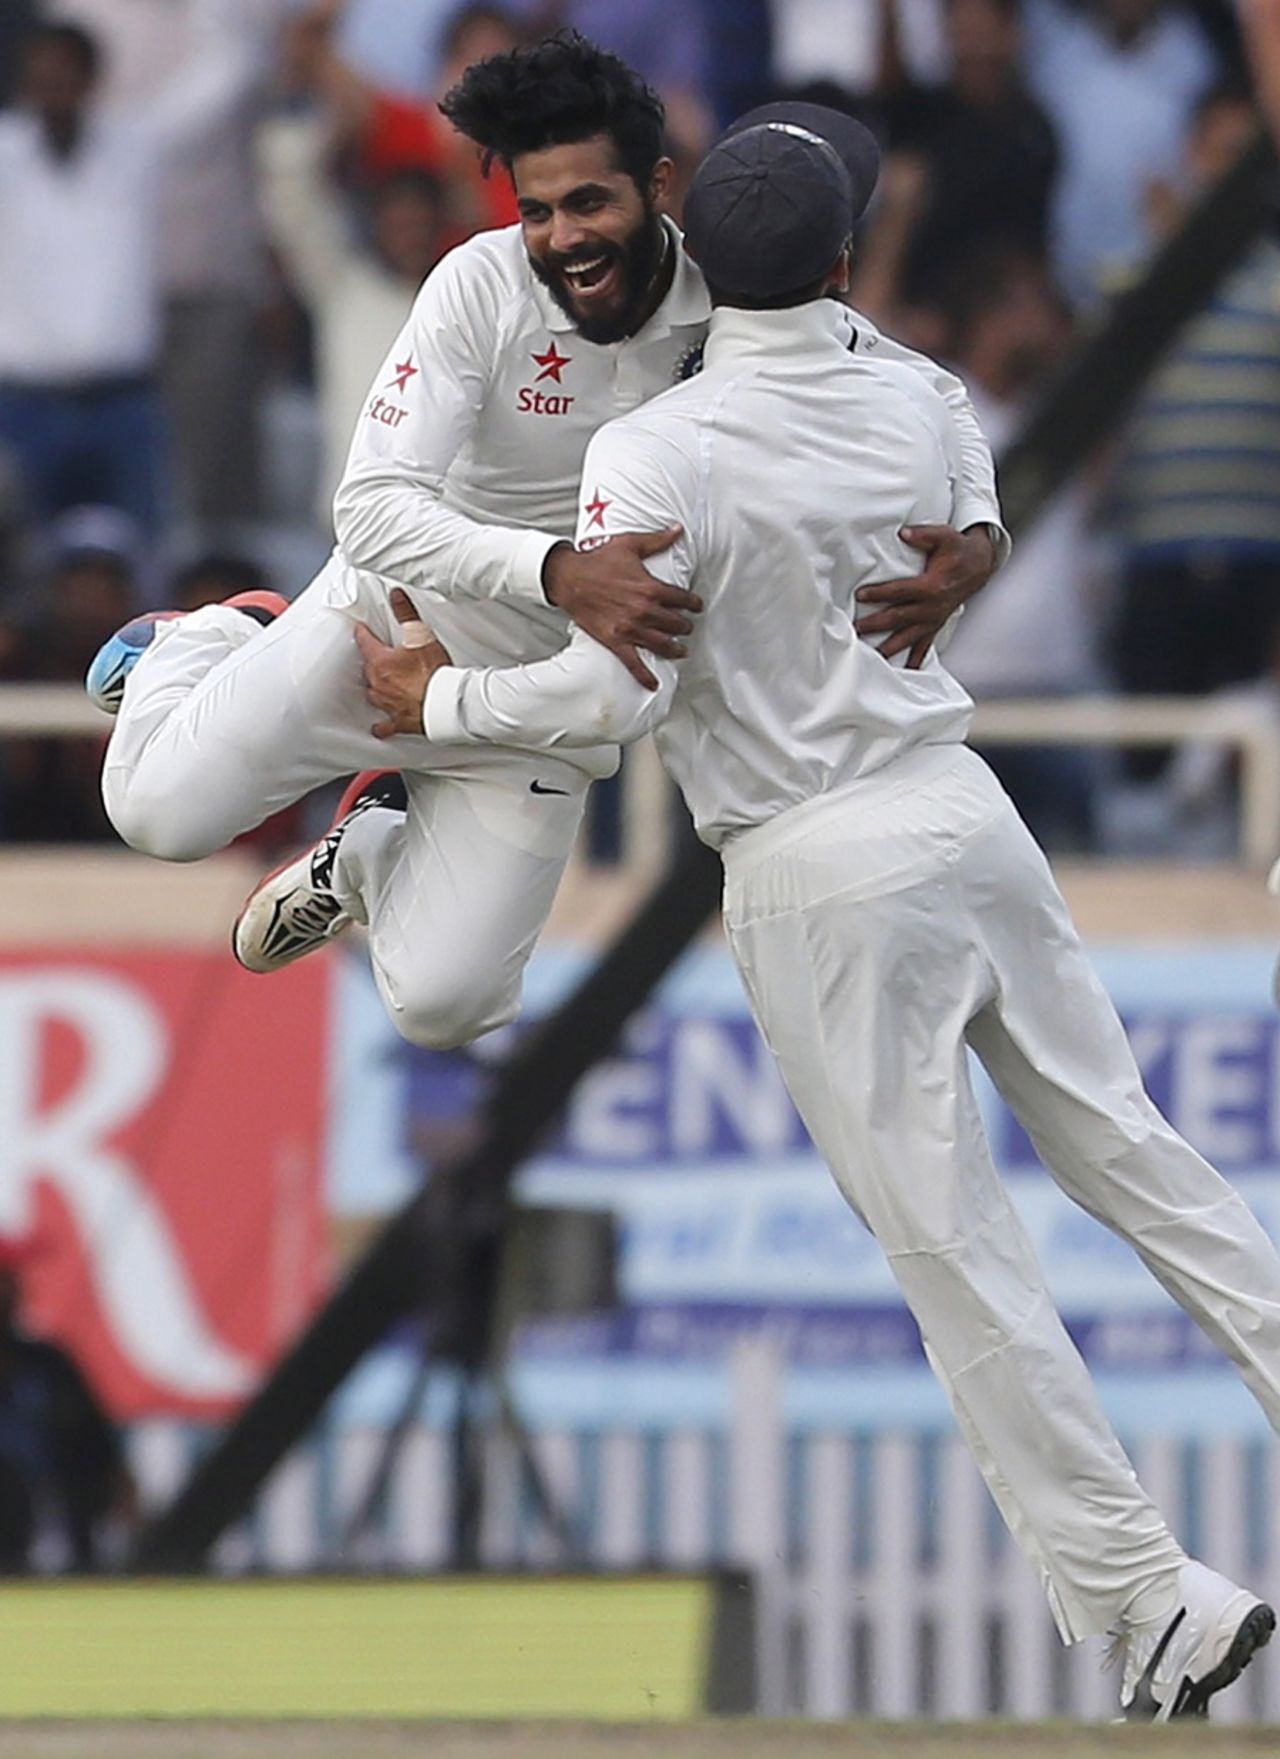 Ravindra Jadeja took two wickets before stumps, India v Australia, 3rd Test, Ranchi, 4th day, March 19, 2017